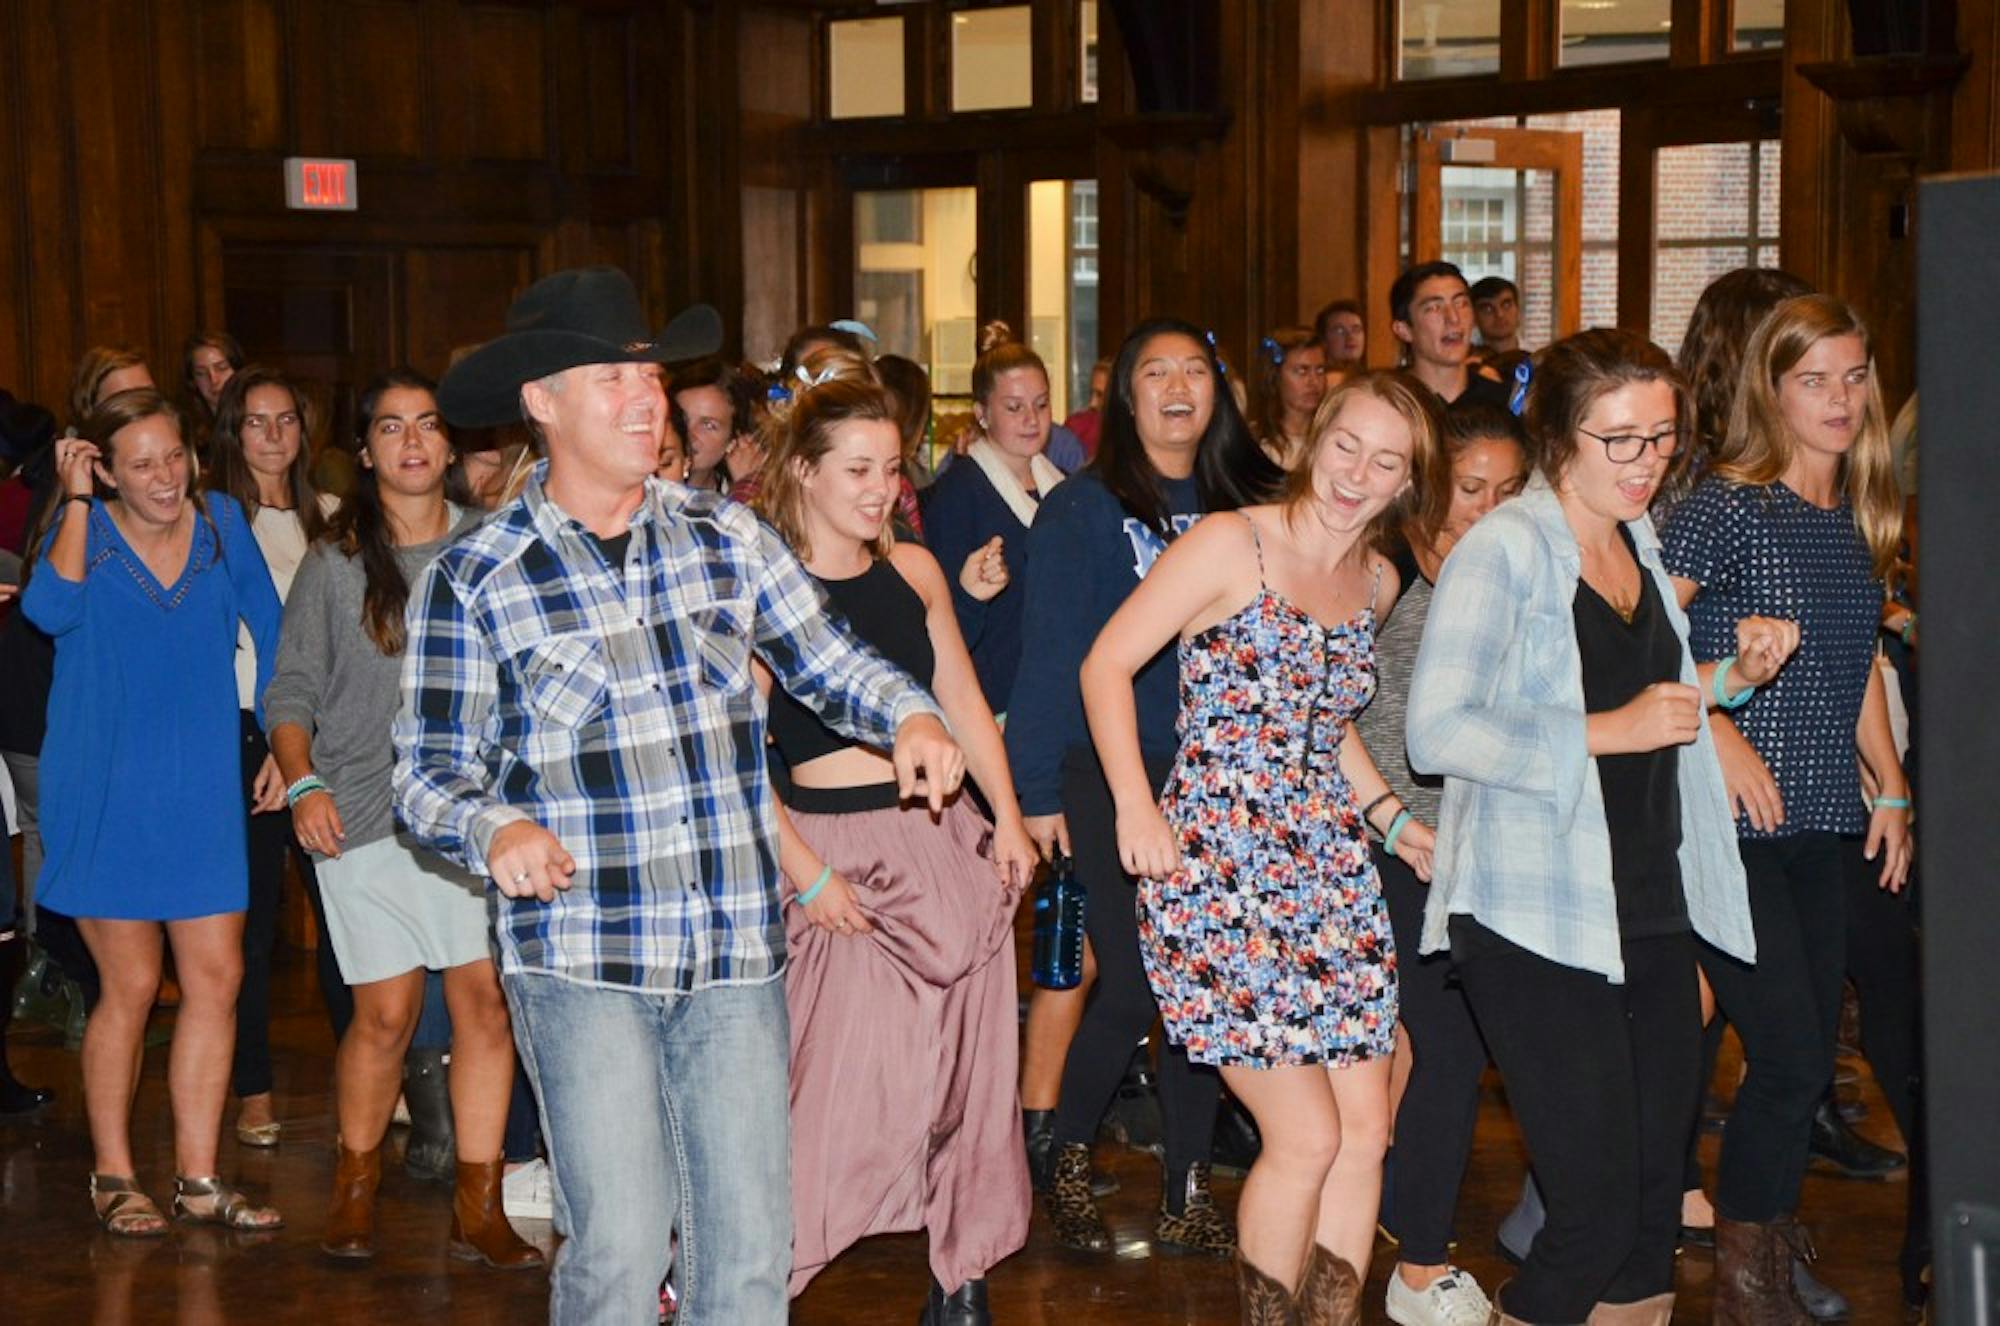 Students line-dance at the memorial service for Summer Hammond ’17, who died in July.